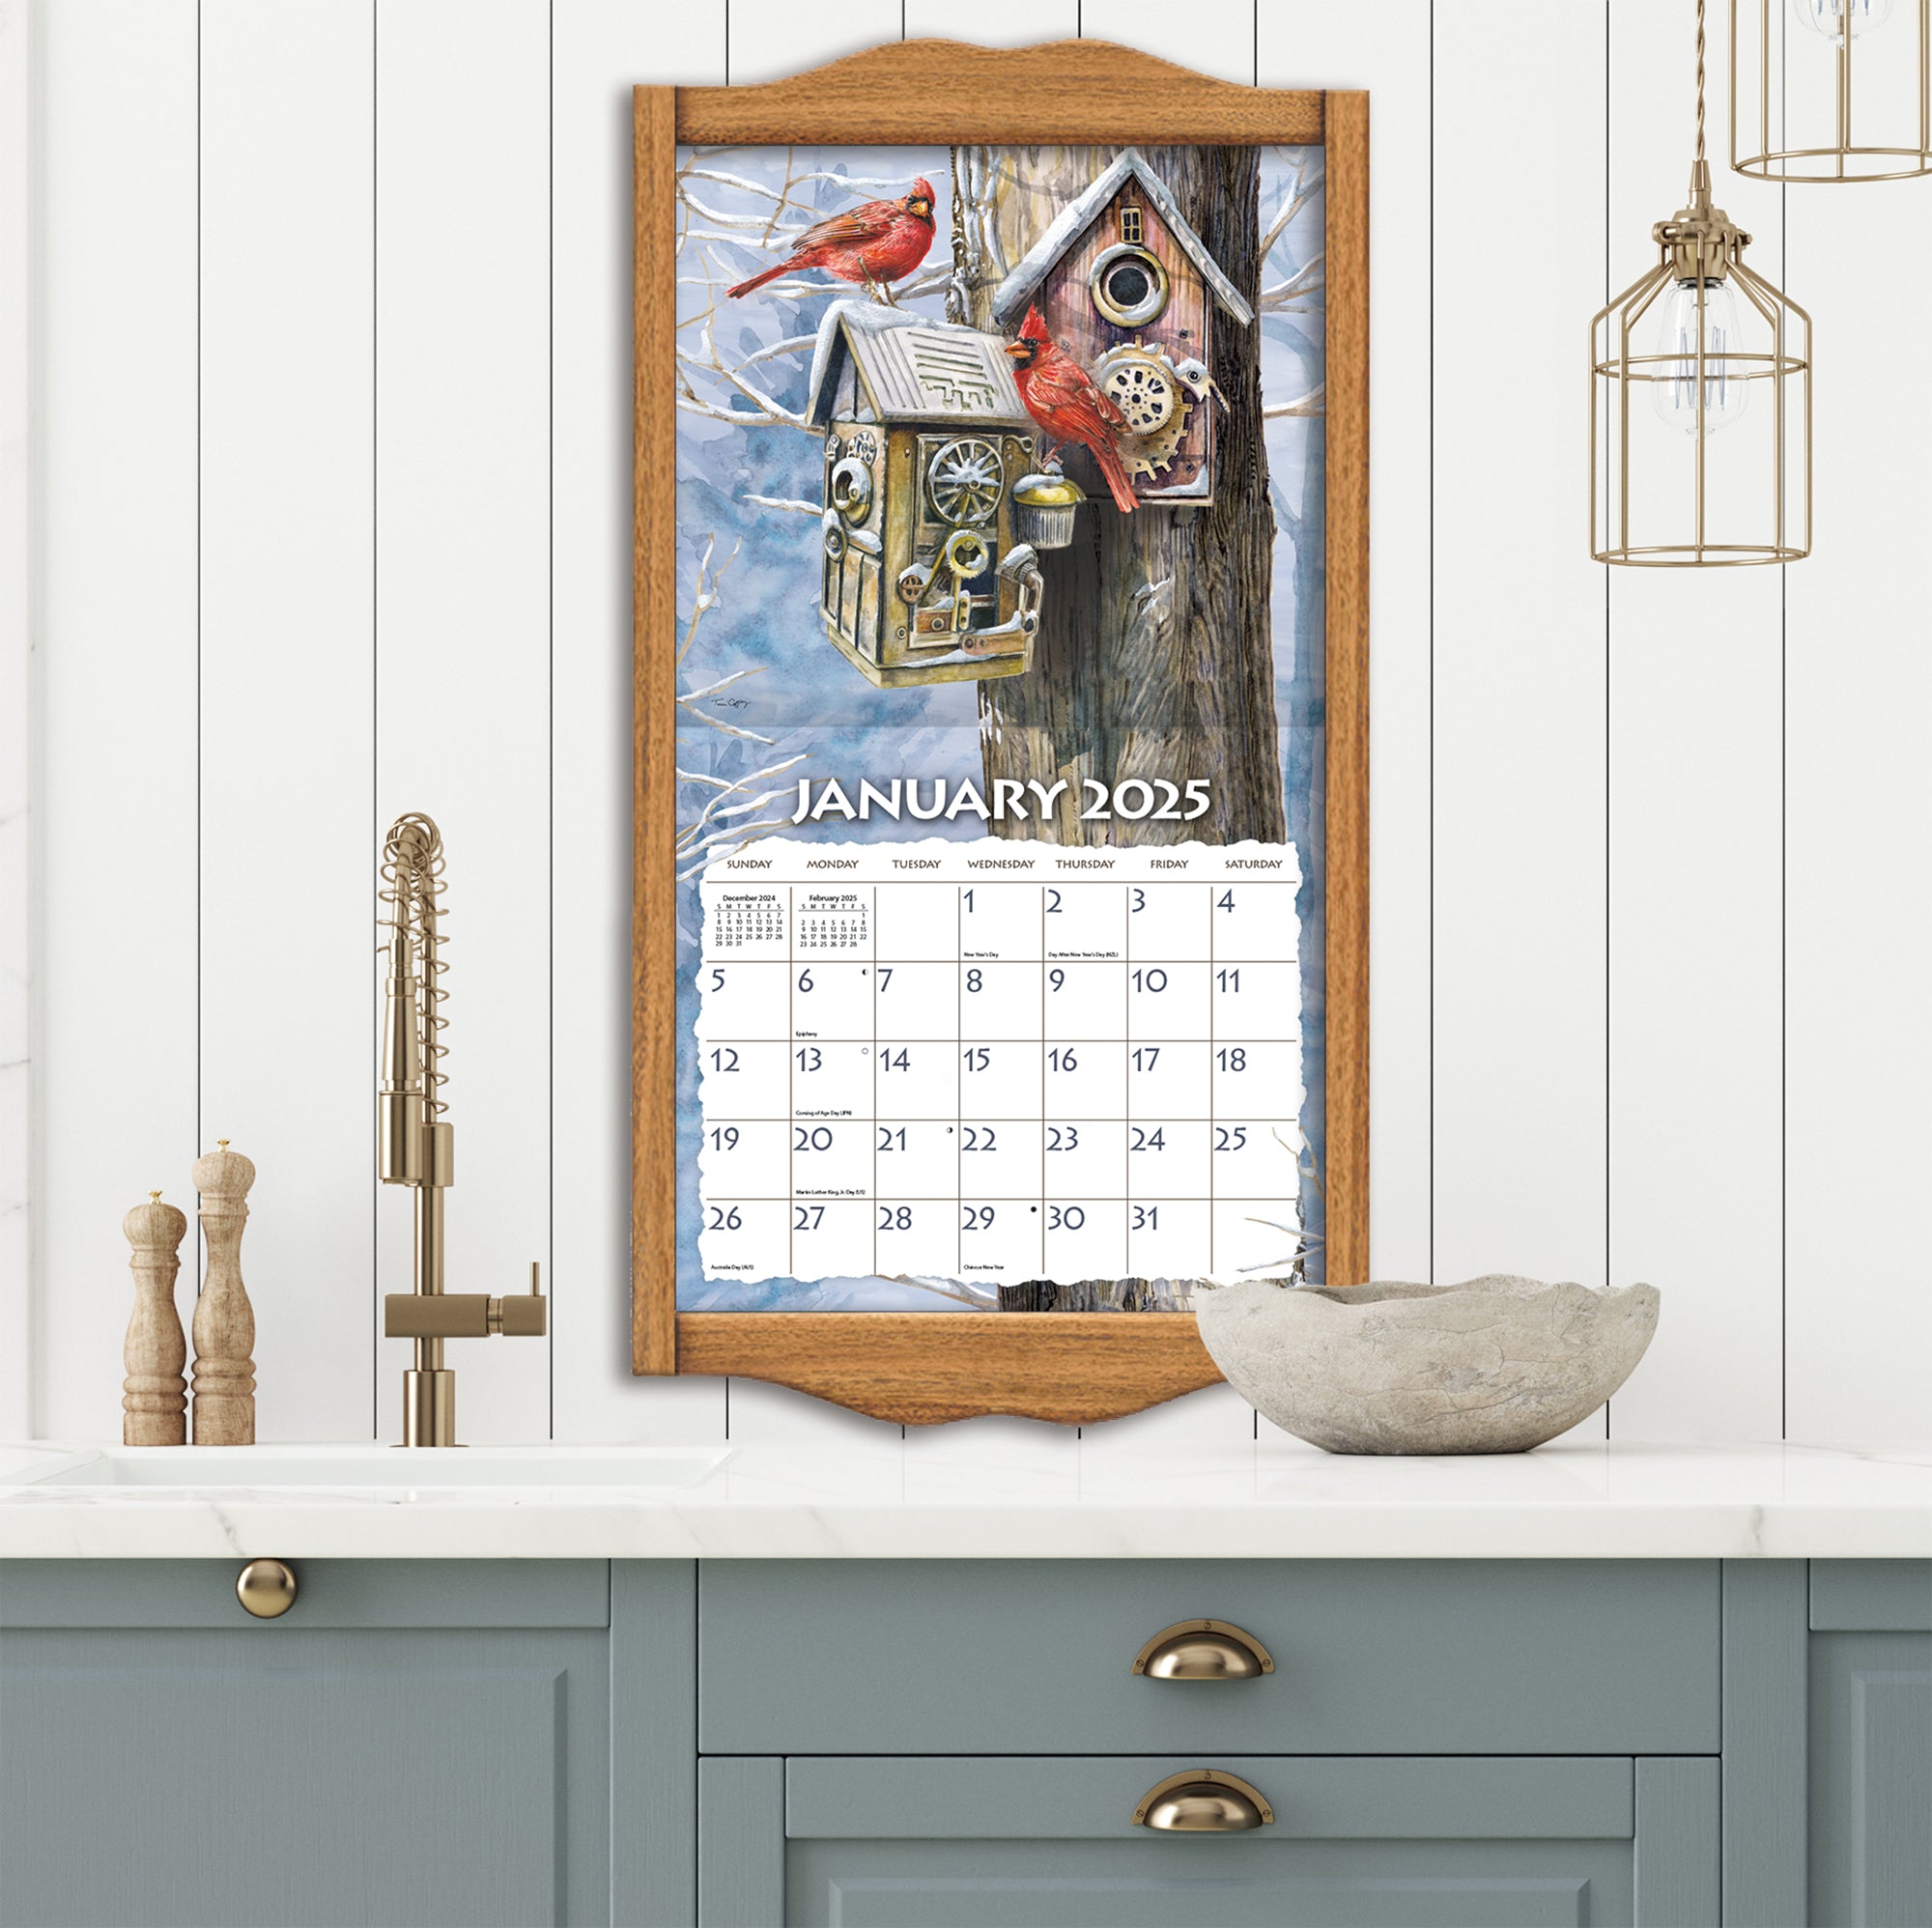 2025 Birdhouses by Tim Coffey - LANG Deluxe Wall Calendar